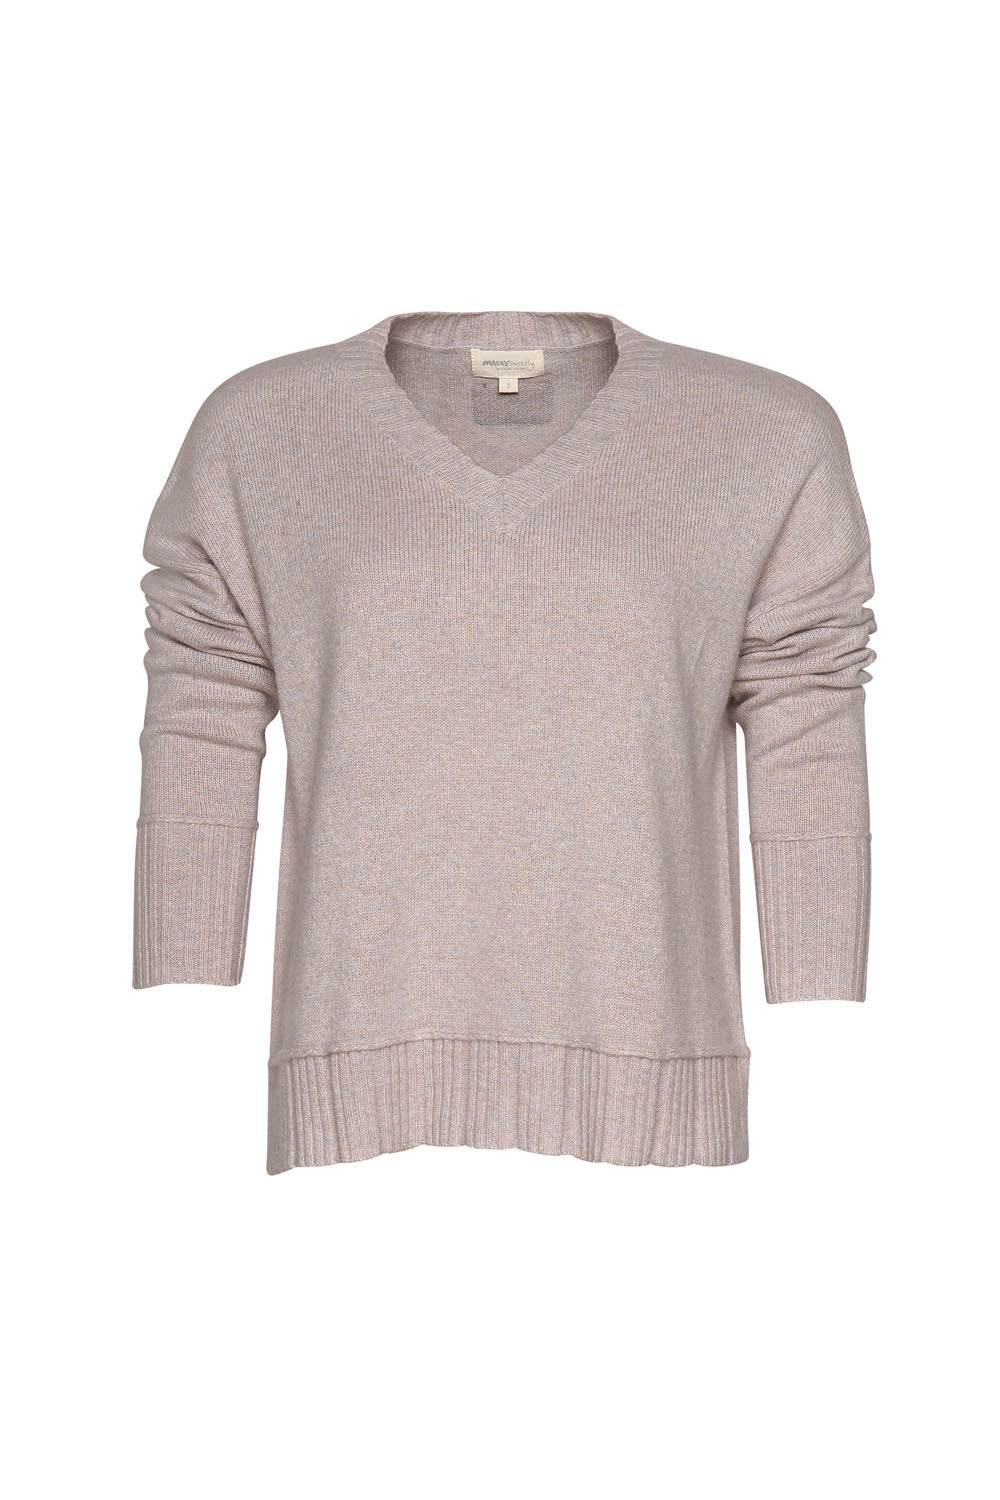 MADLY SWEETLY GIRLS CLUB SWEATER - MARBLE - THE VOGUE STORE